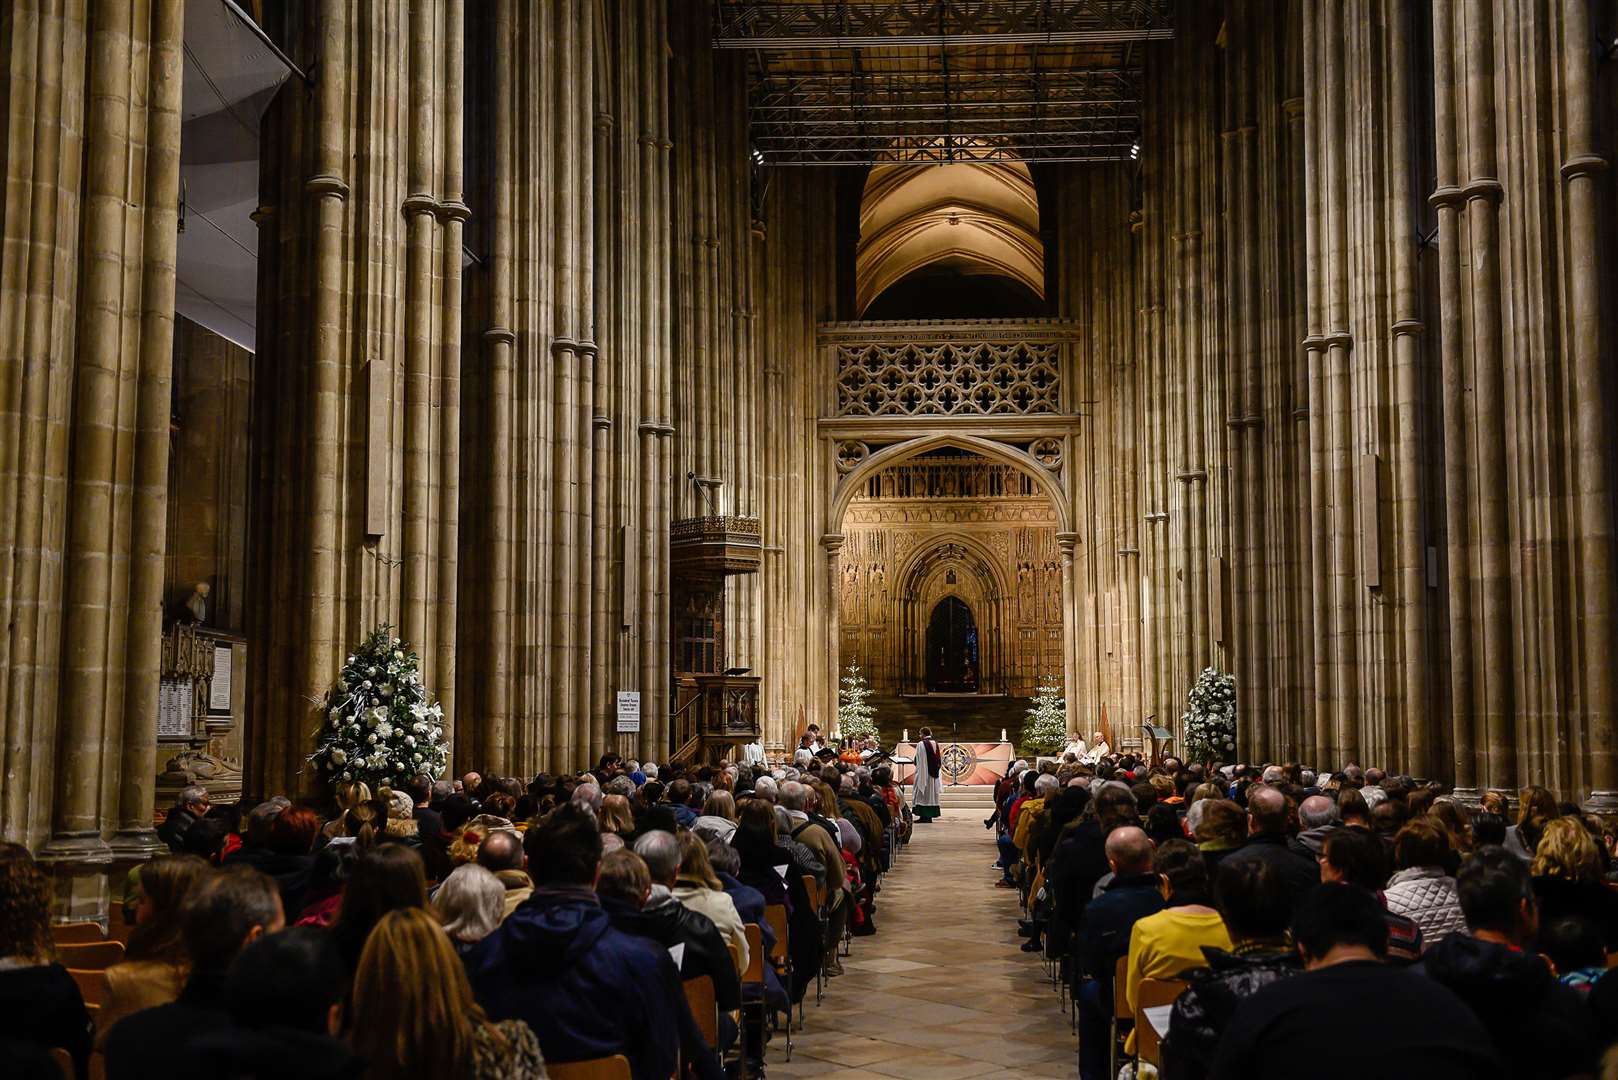 The Cathedral's income from ticket sales has dried up